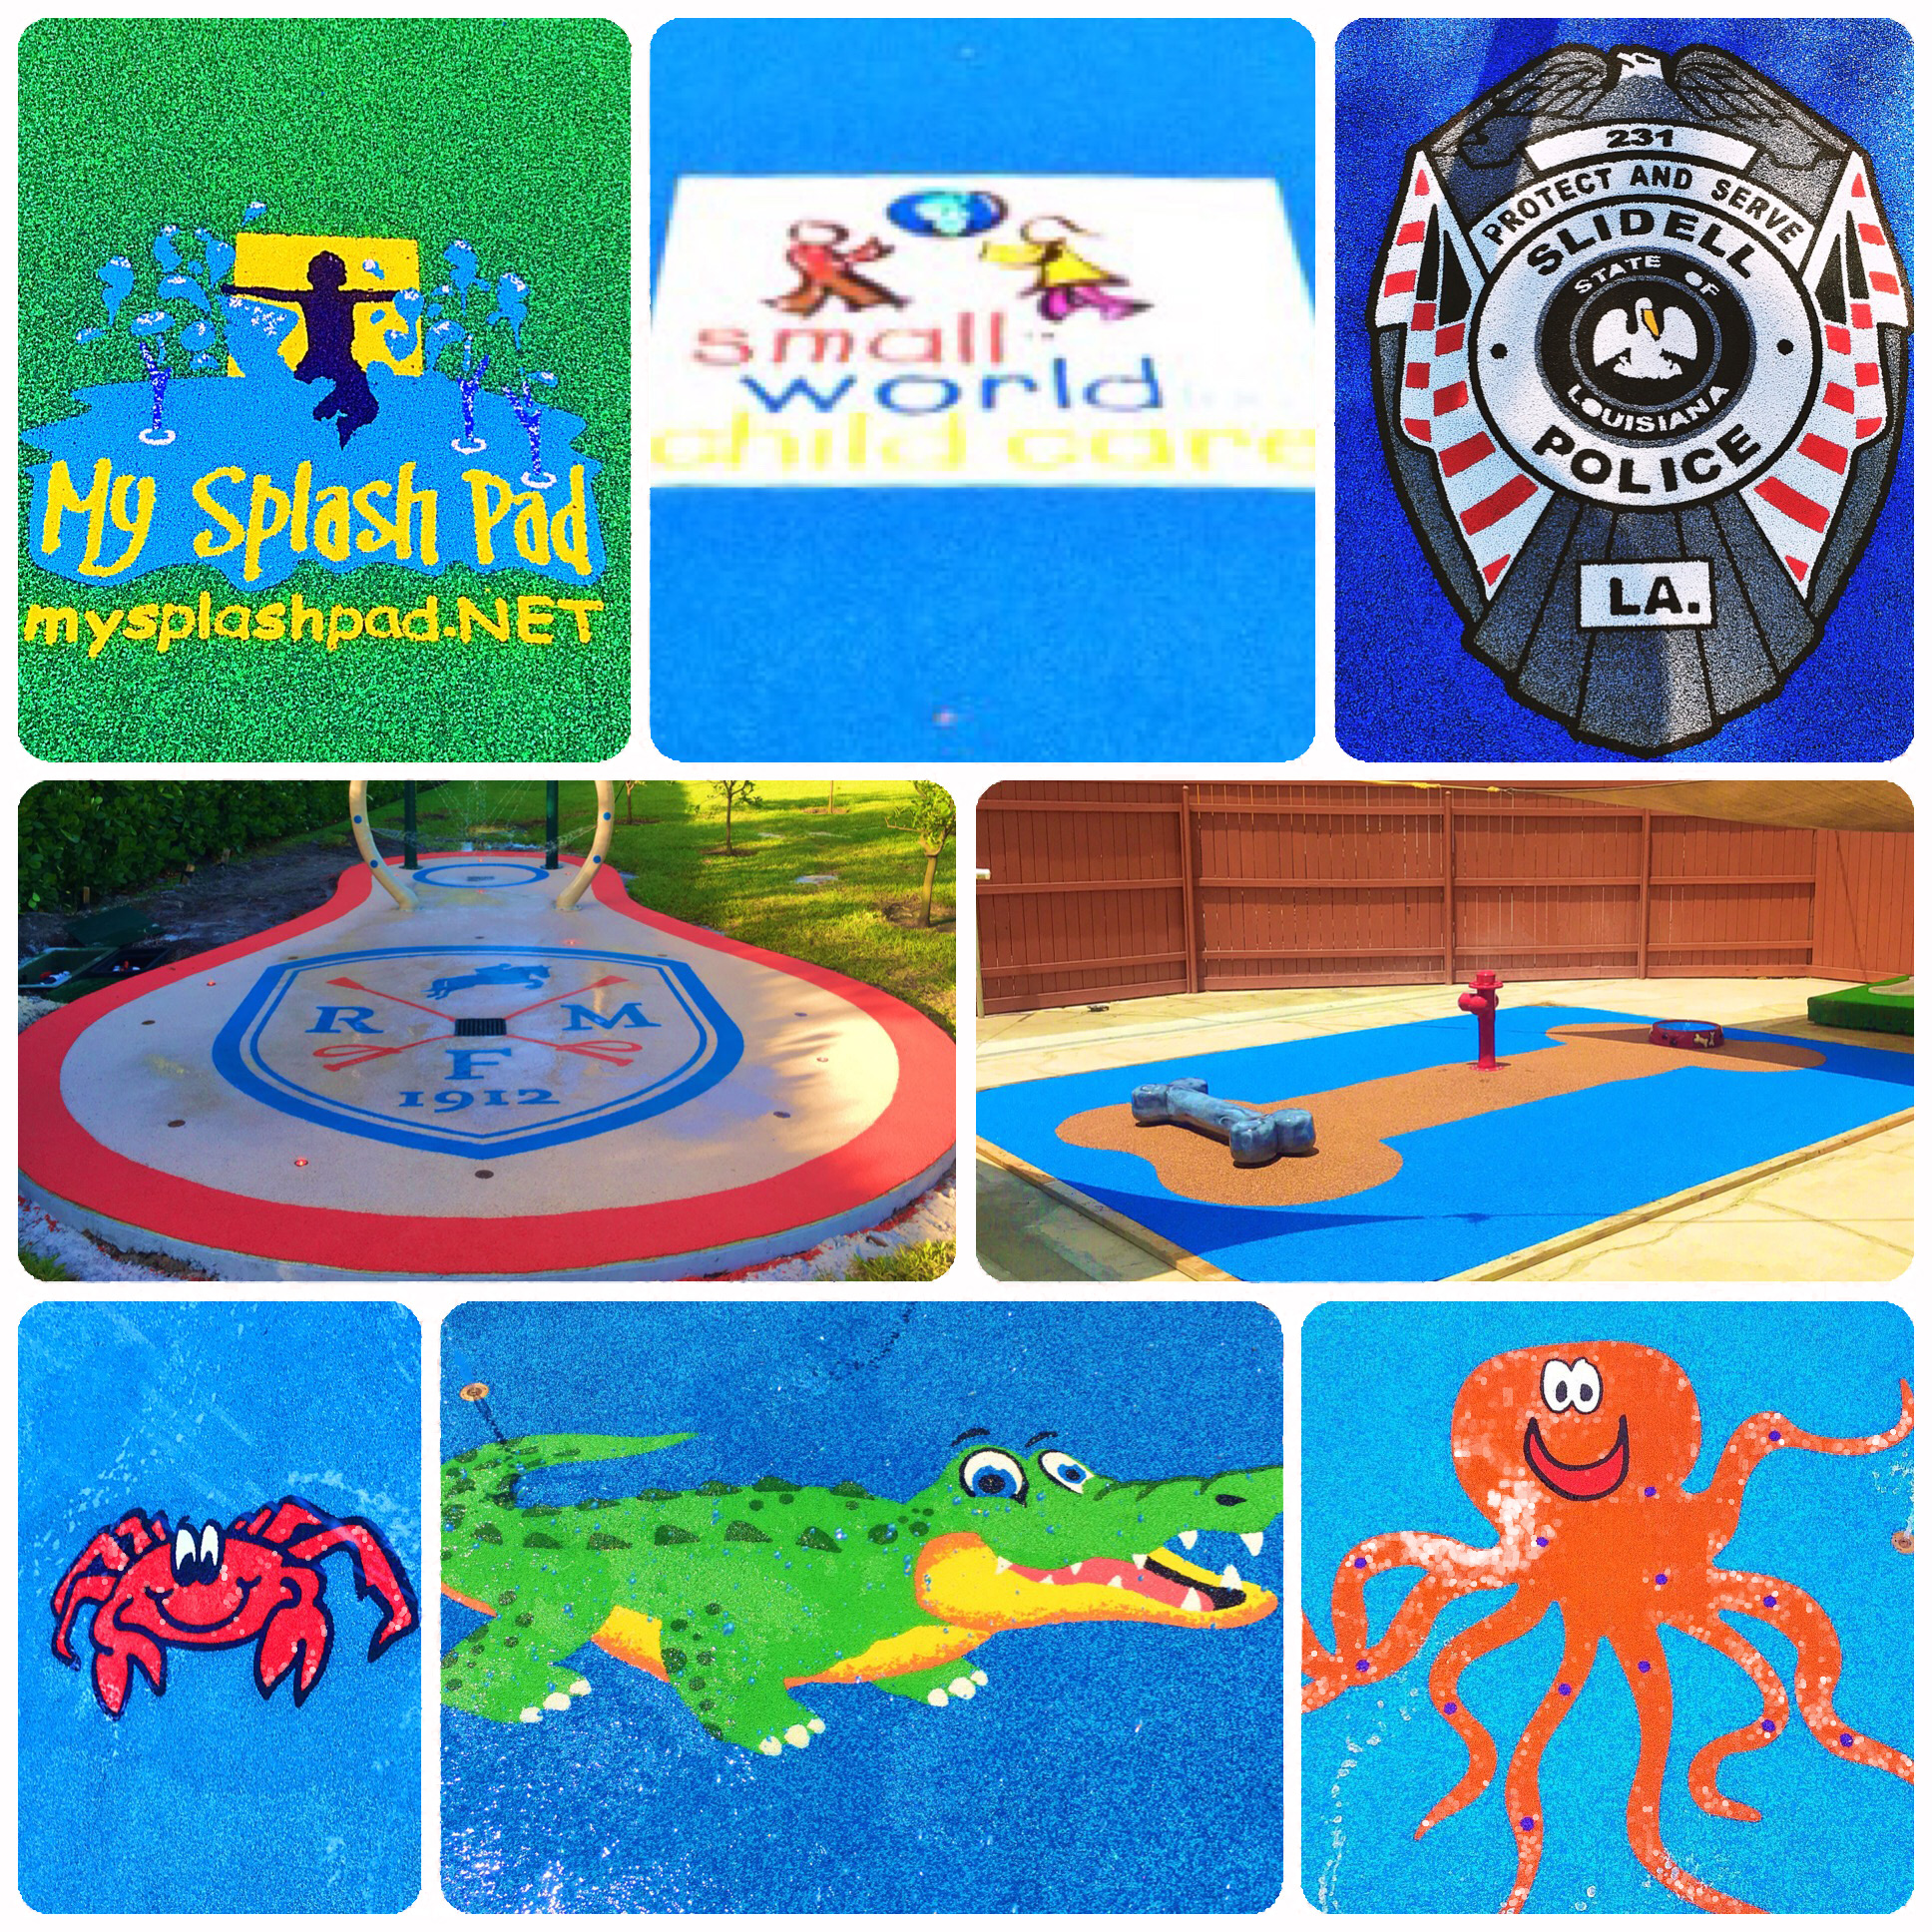 My Splash Pad, Safety Surface Installer For Water Parks Pads Spray Areas